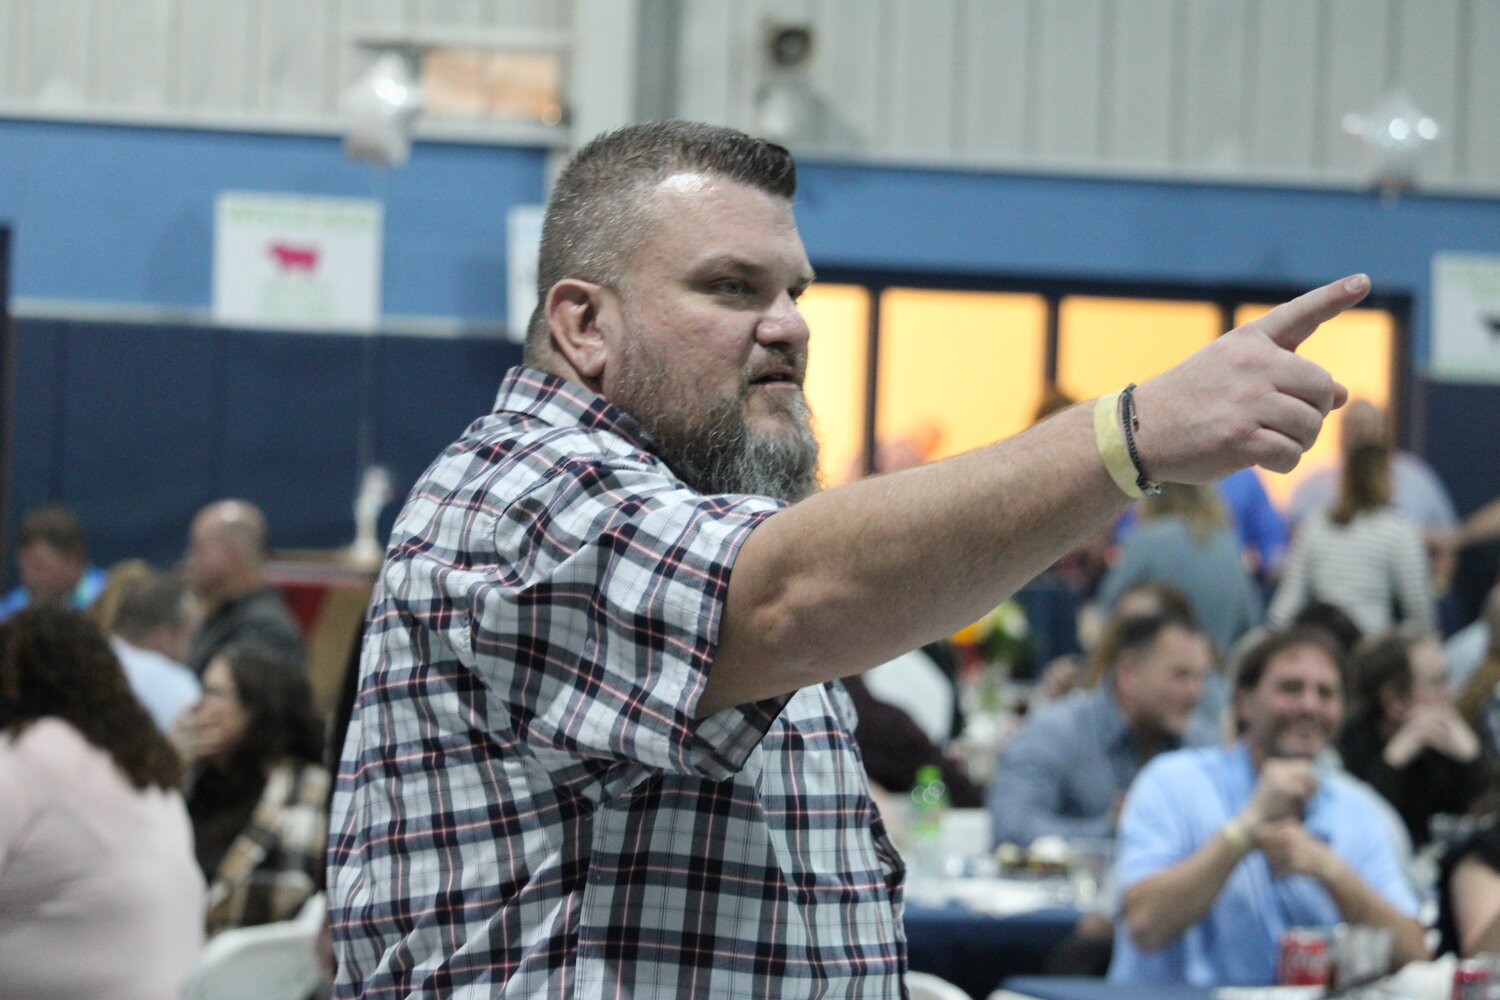 Scott Taylor points at a bidder during the auction.